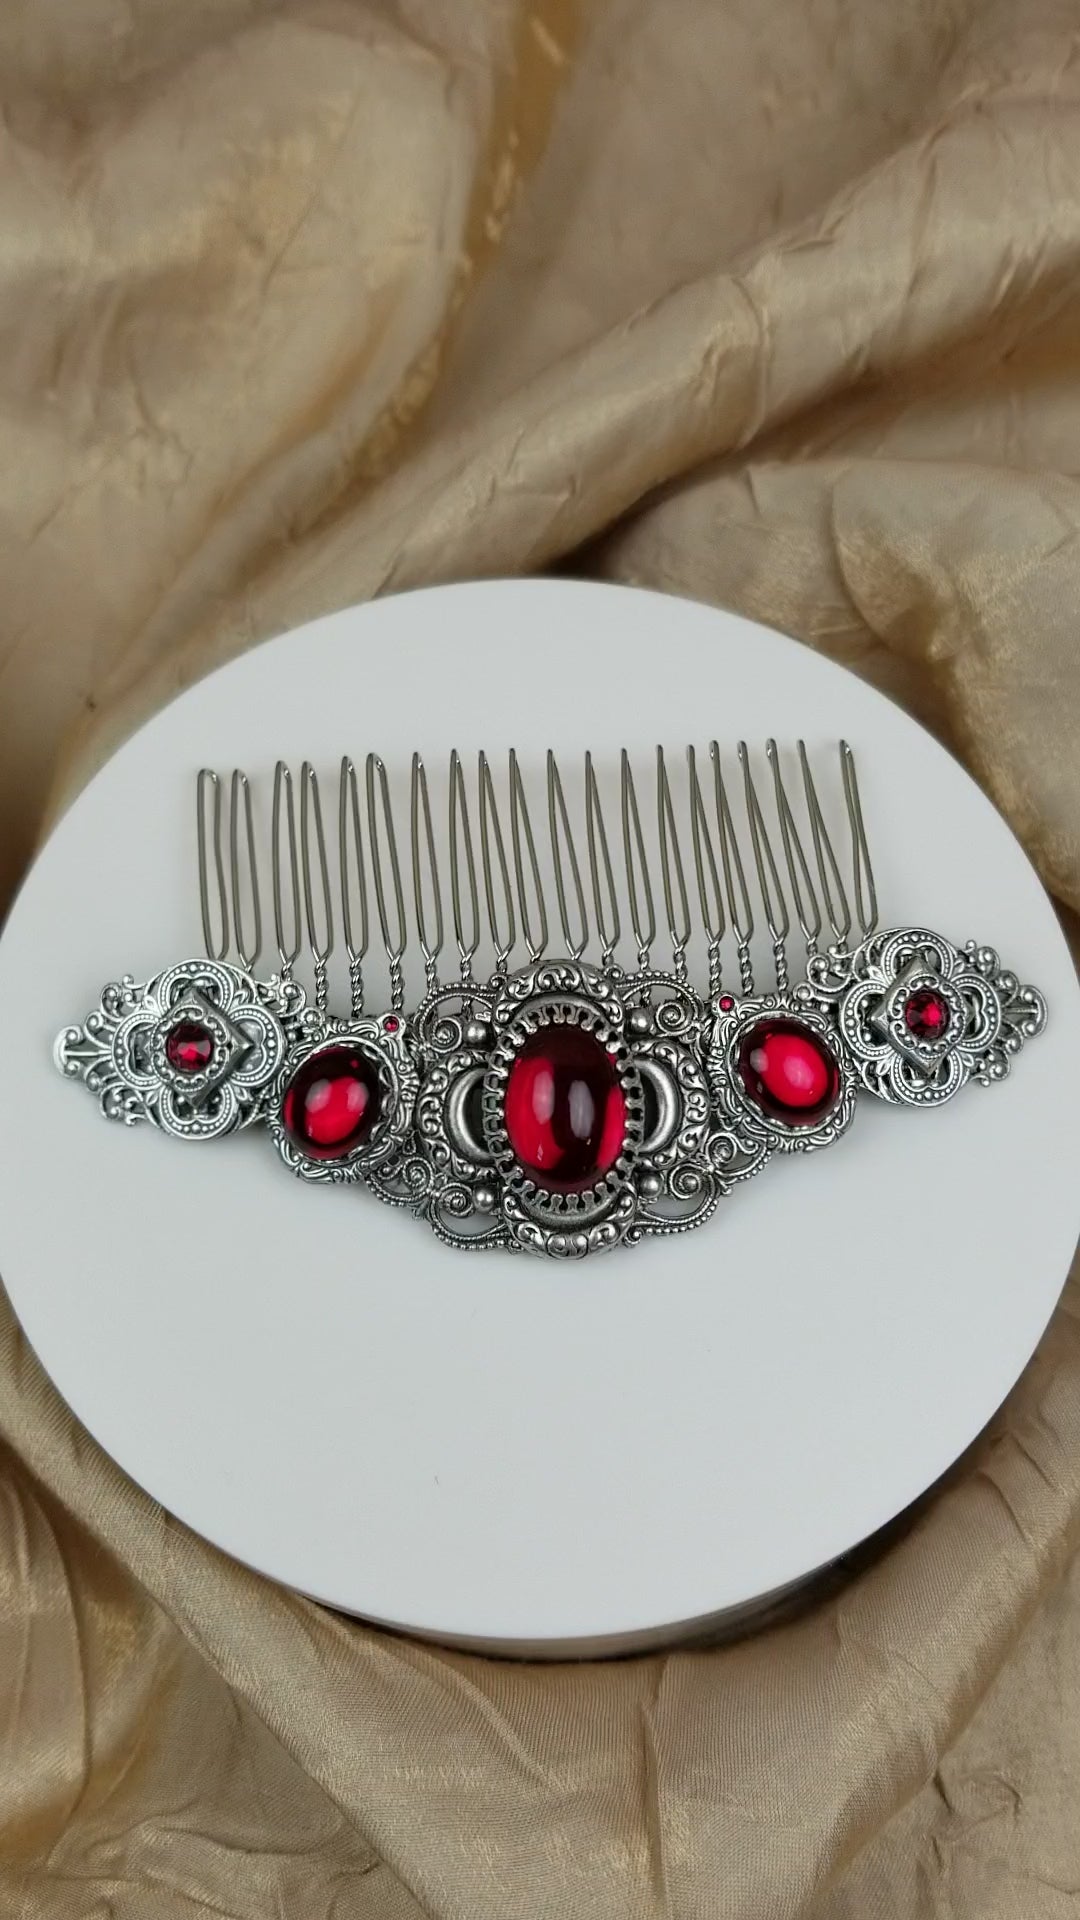 Video: Canterbury Comb in Garnet and Antiqued Silver by Rabbitwood and Reason